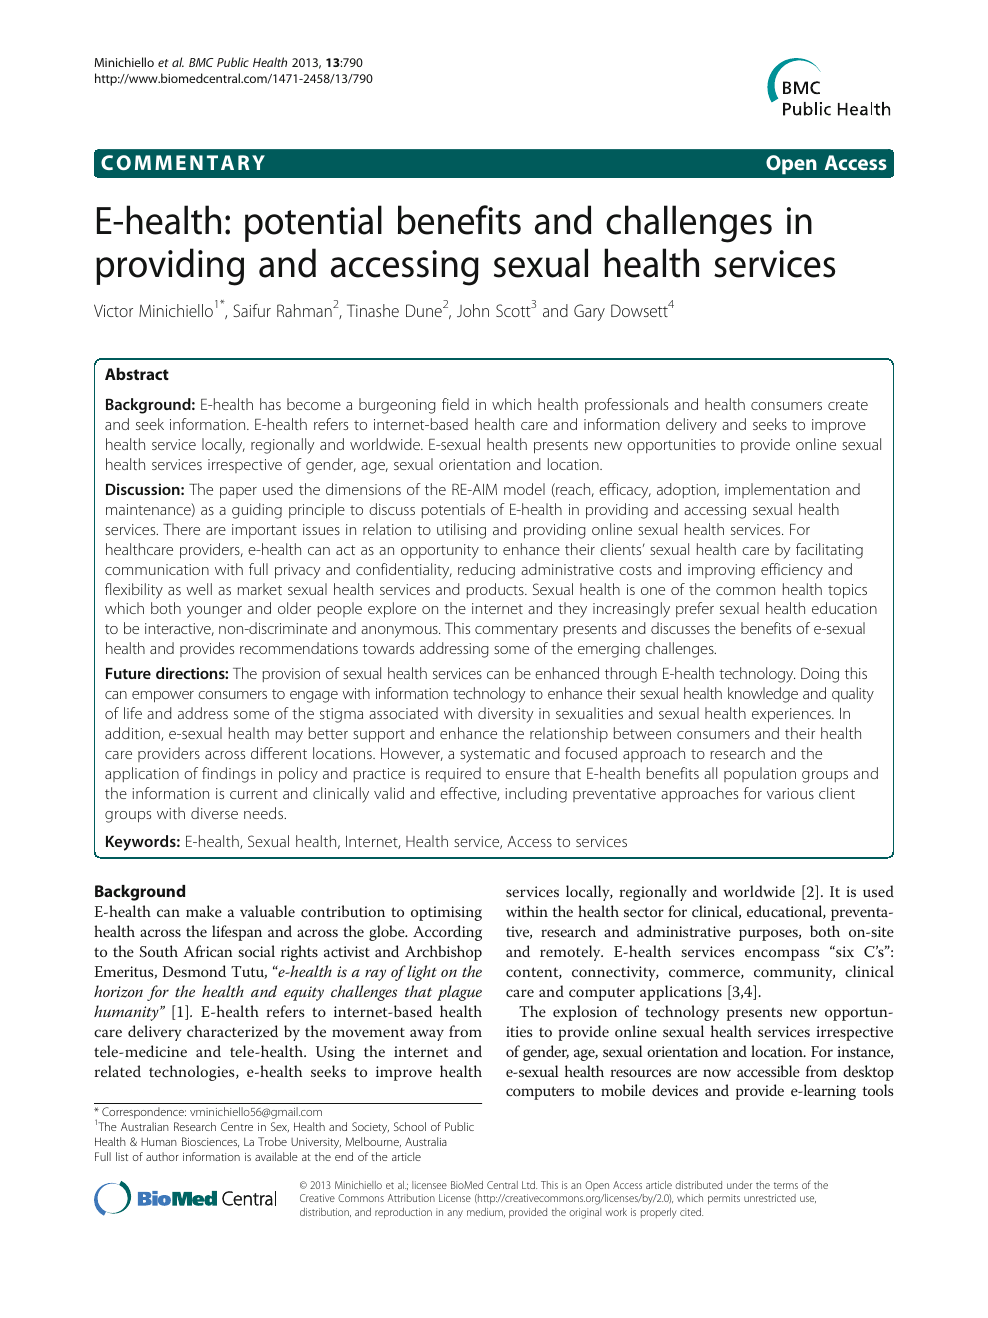 E-health potential benefits and challenges in providing and accessing sexual health services image